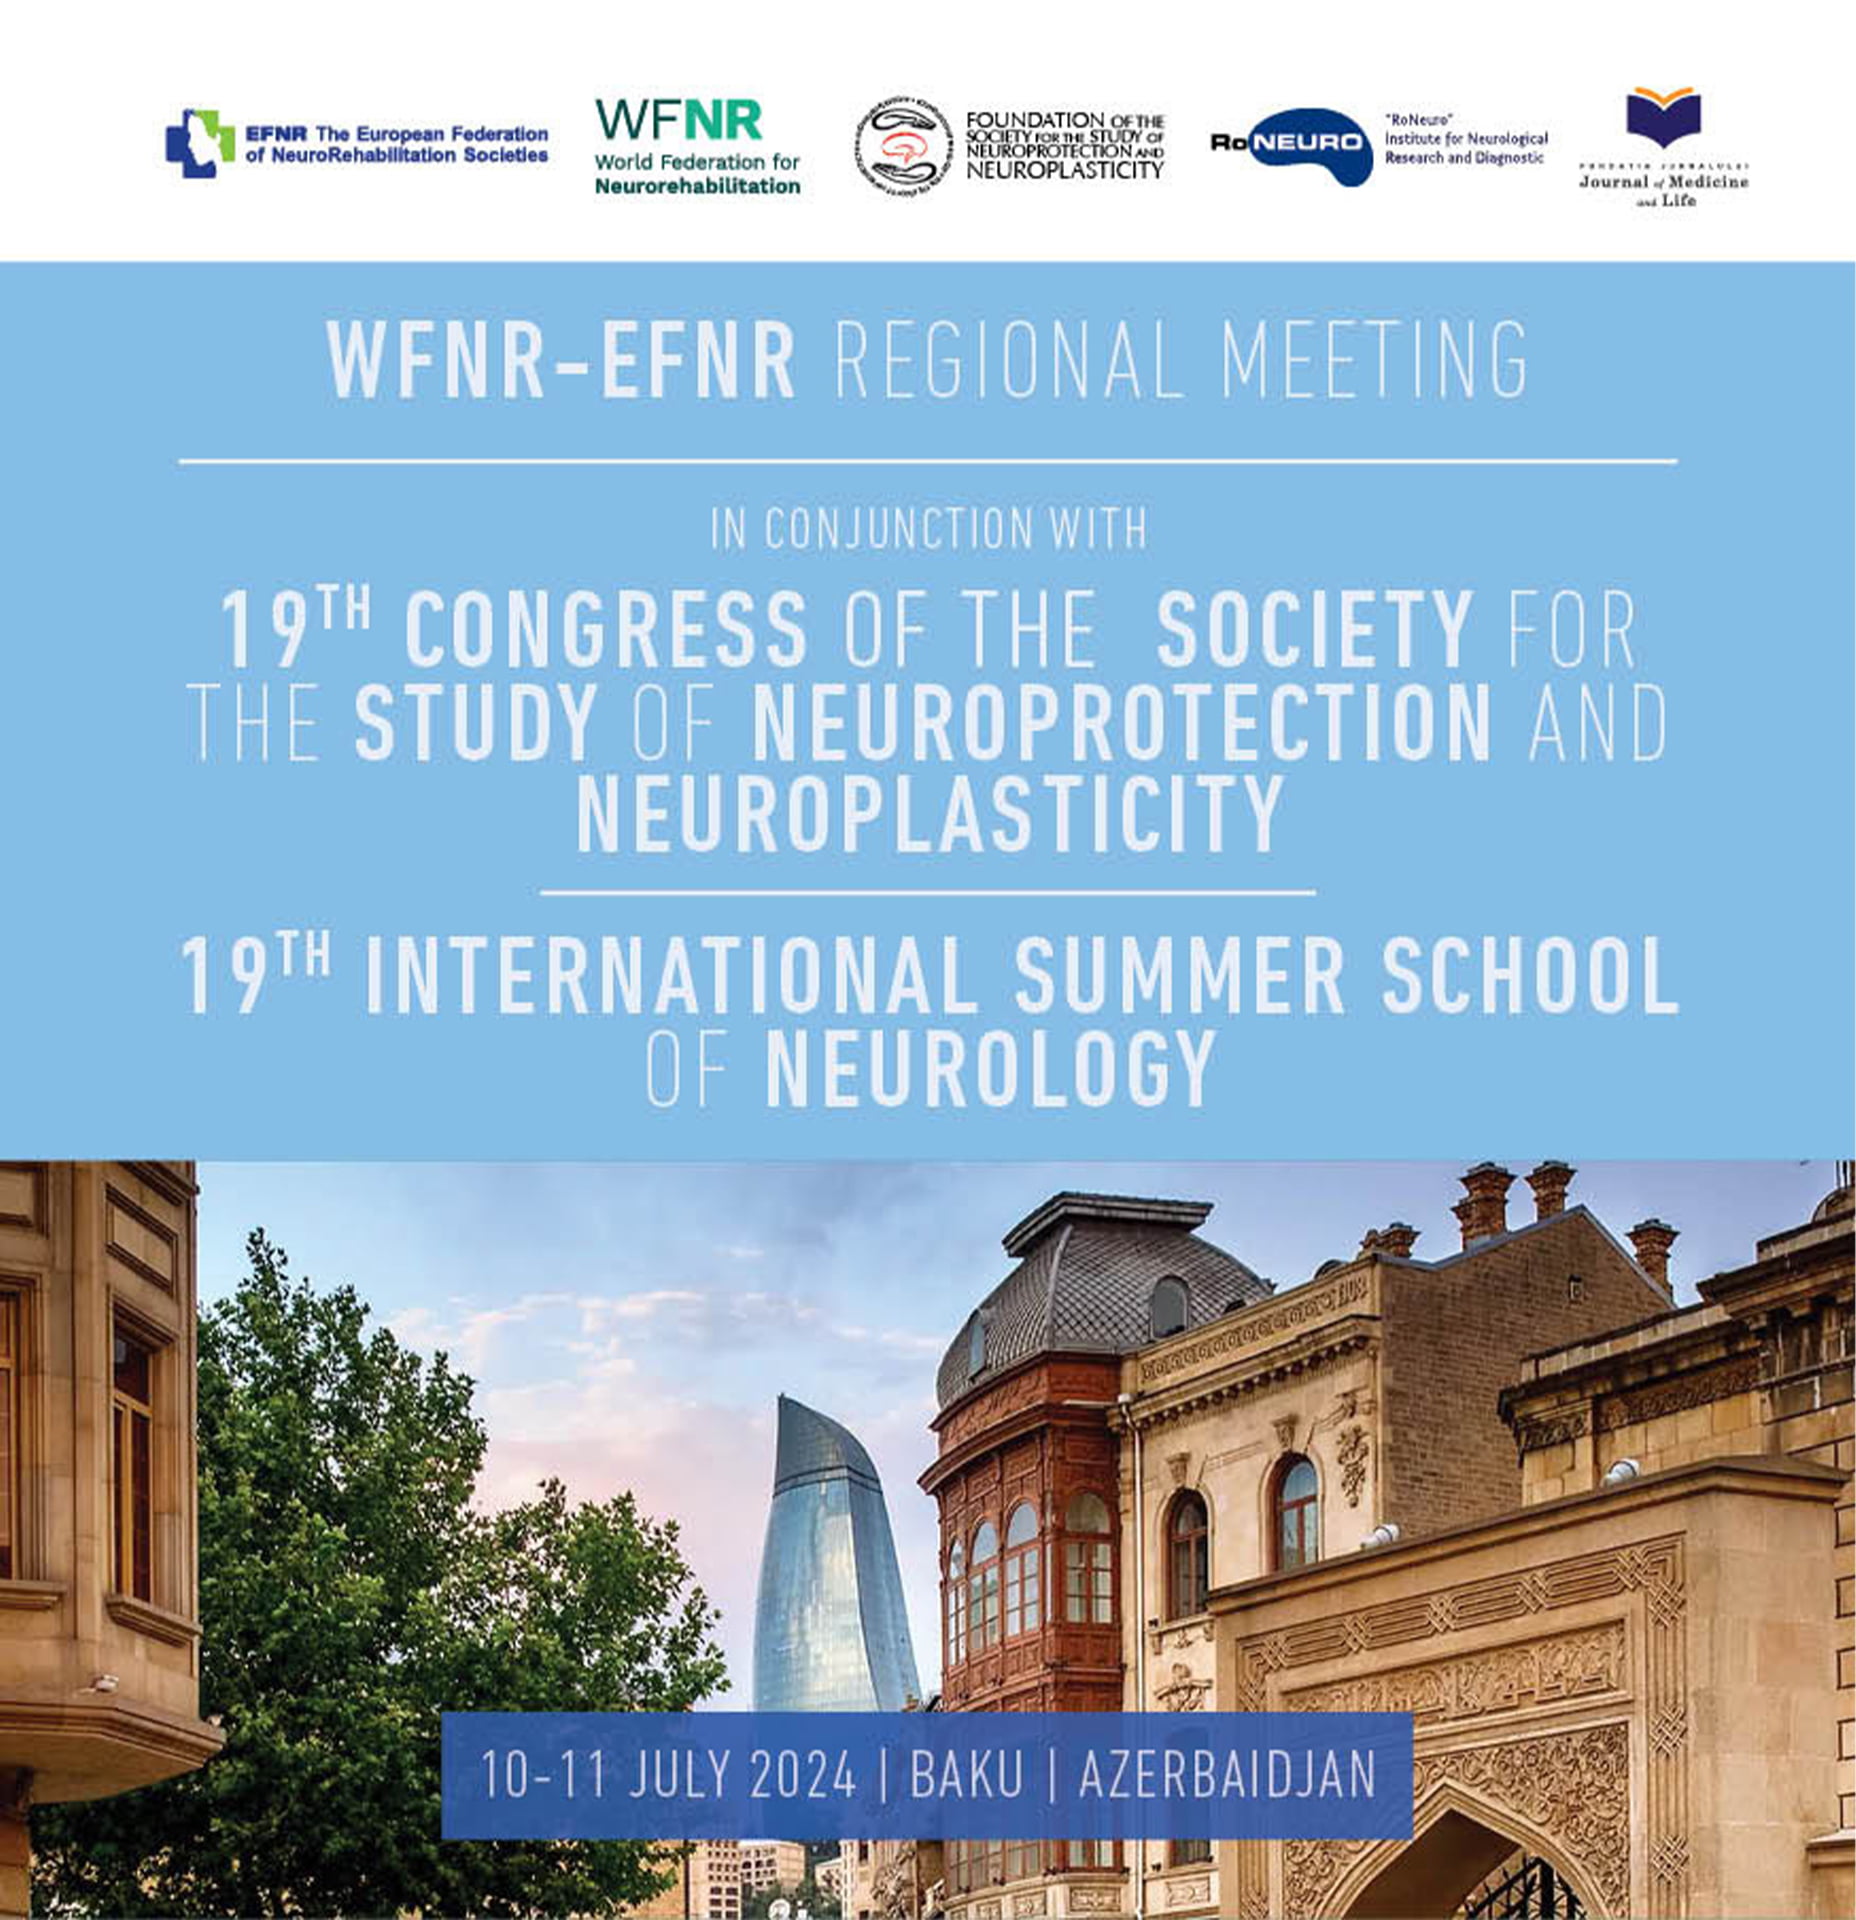 WFNR-EFNR Regional Meeting in conjunction with 19th Congress of the Society for the Study of Neuroprotection and Neuroplasticity and the 19th International Summer School of Neurology